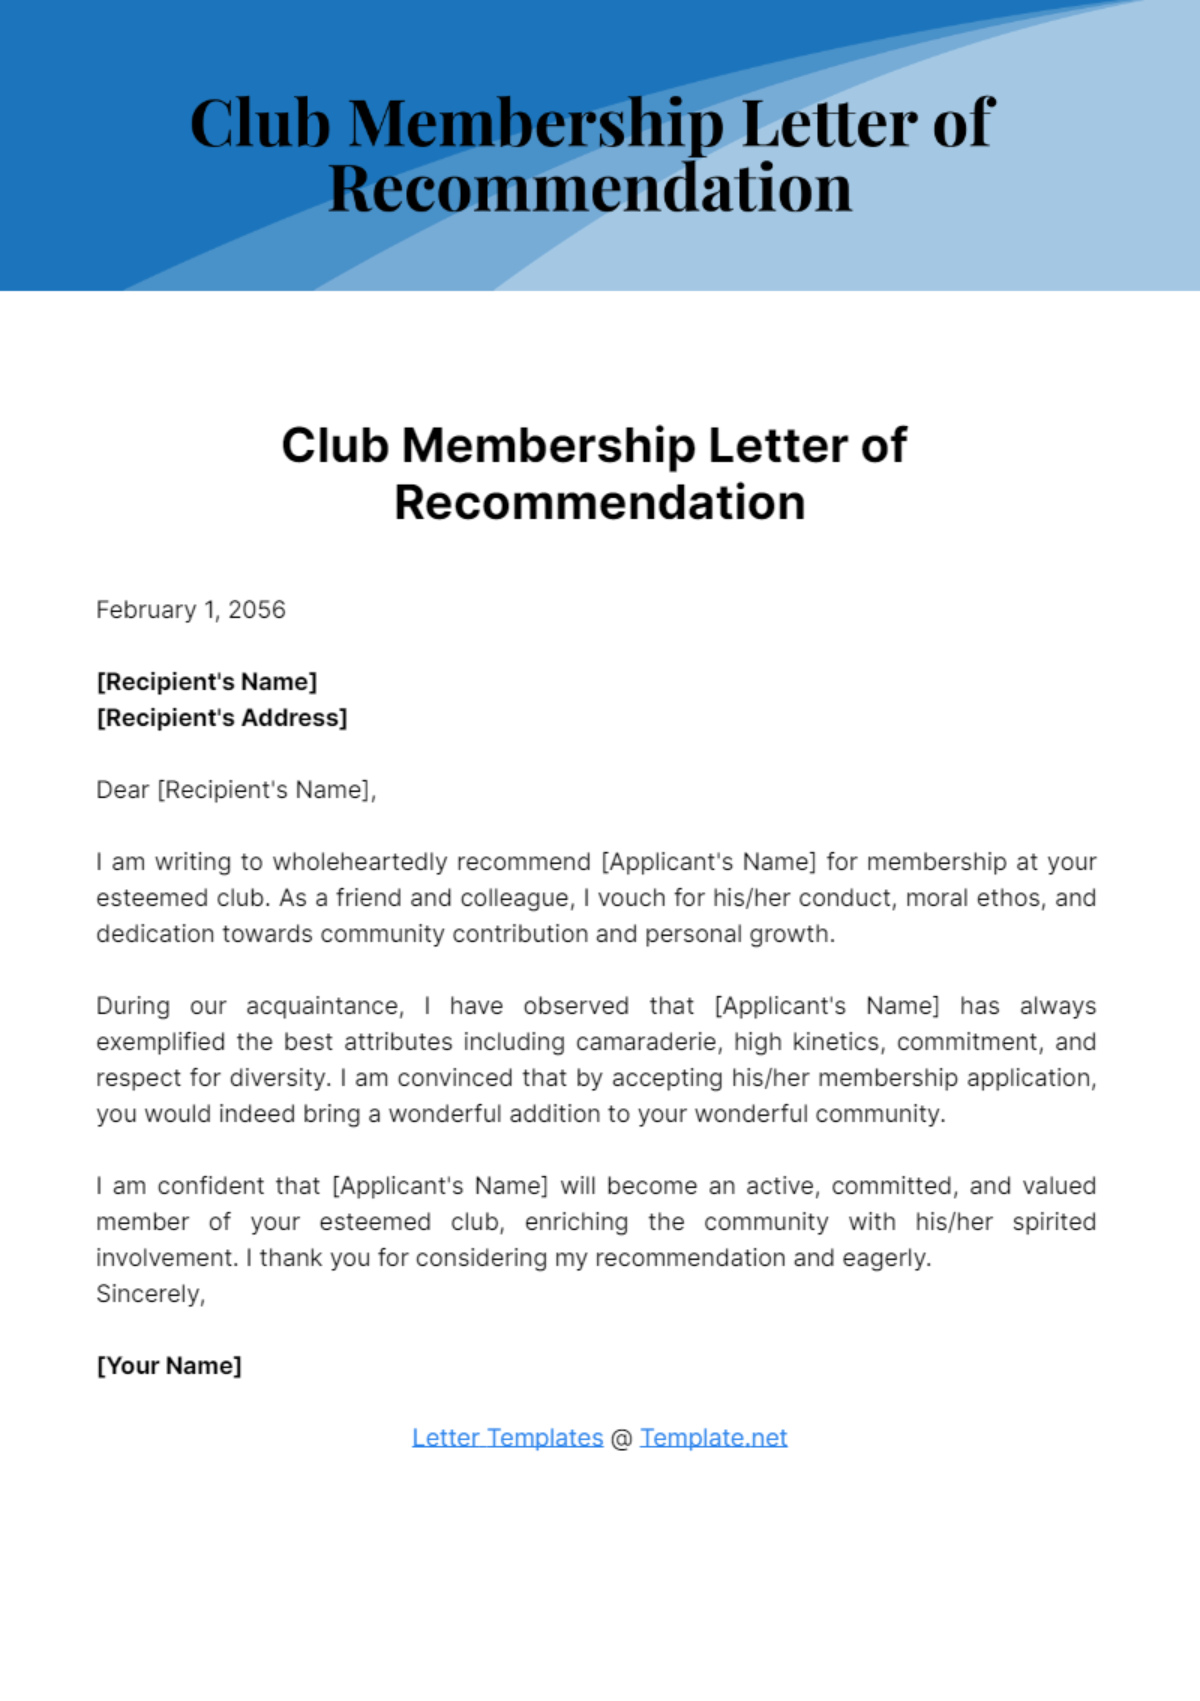 Free Club Membership Letter of Recommendation Template